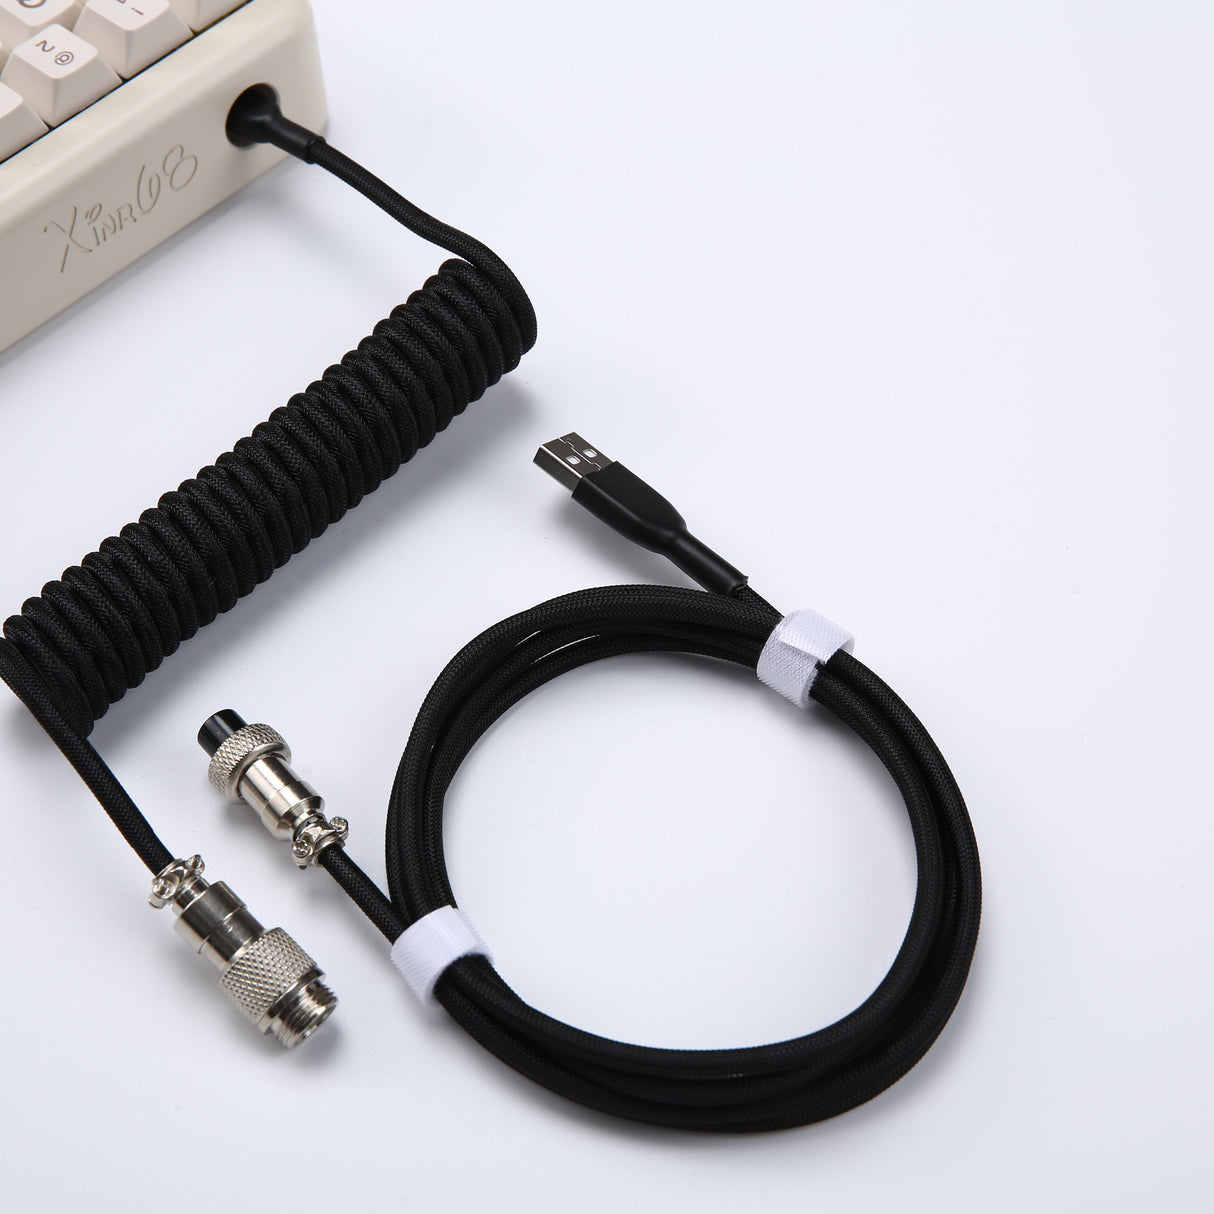 YUNZII Keynovo V3 Coiled Keyboard Cable with Aviator USB Cable for